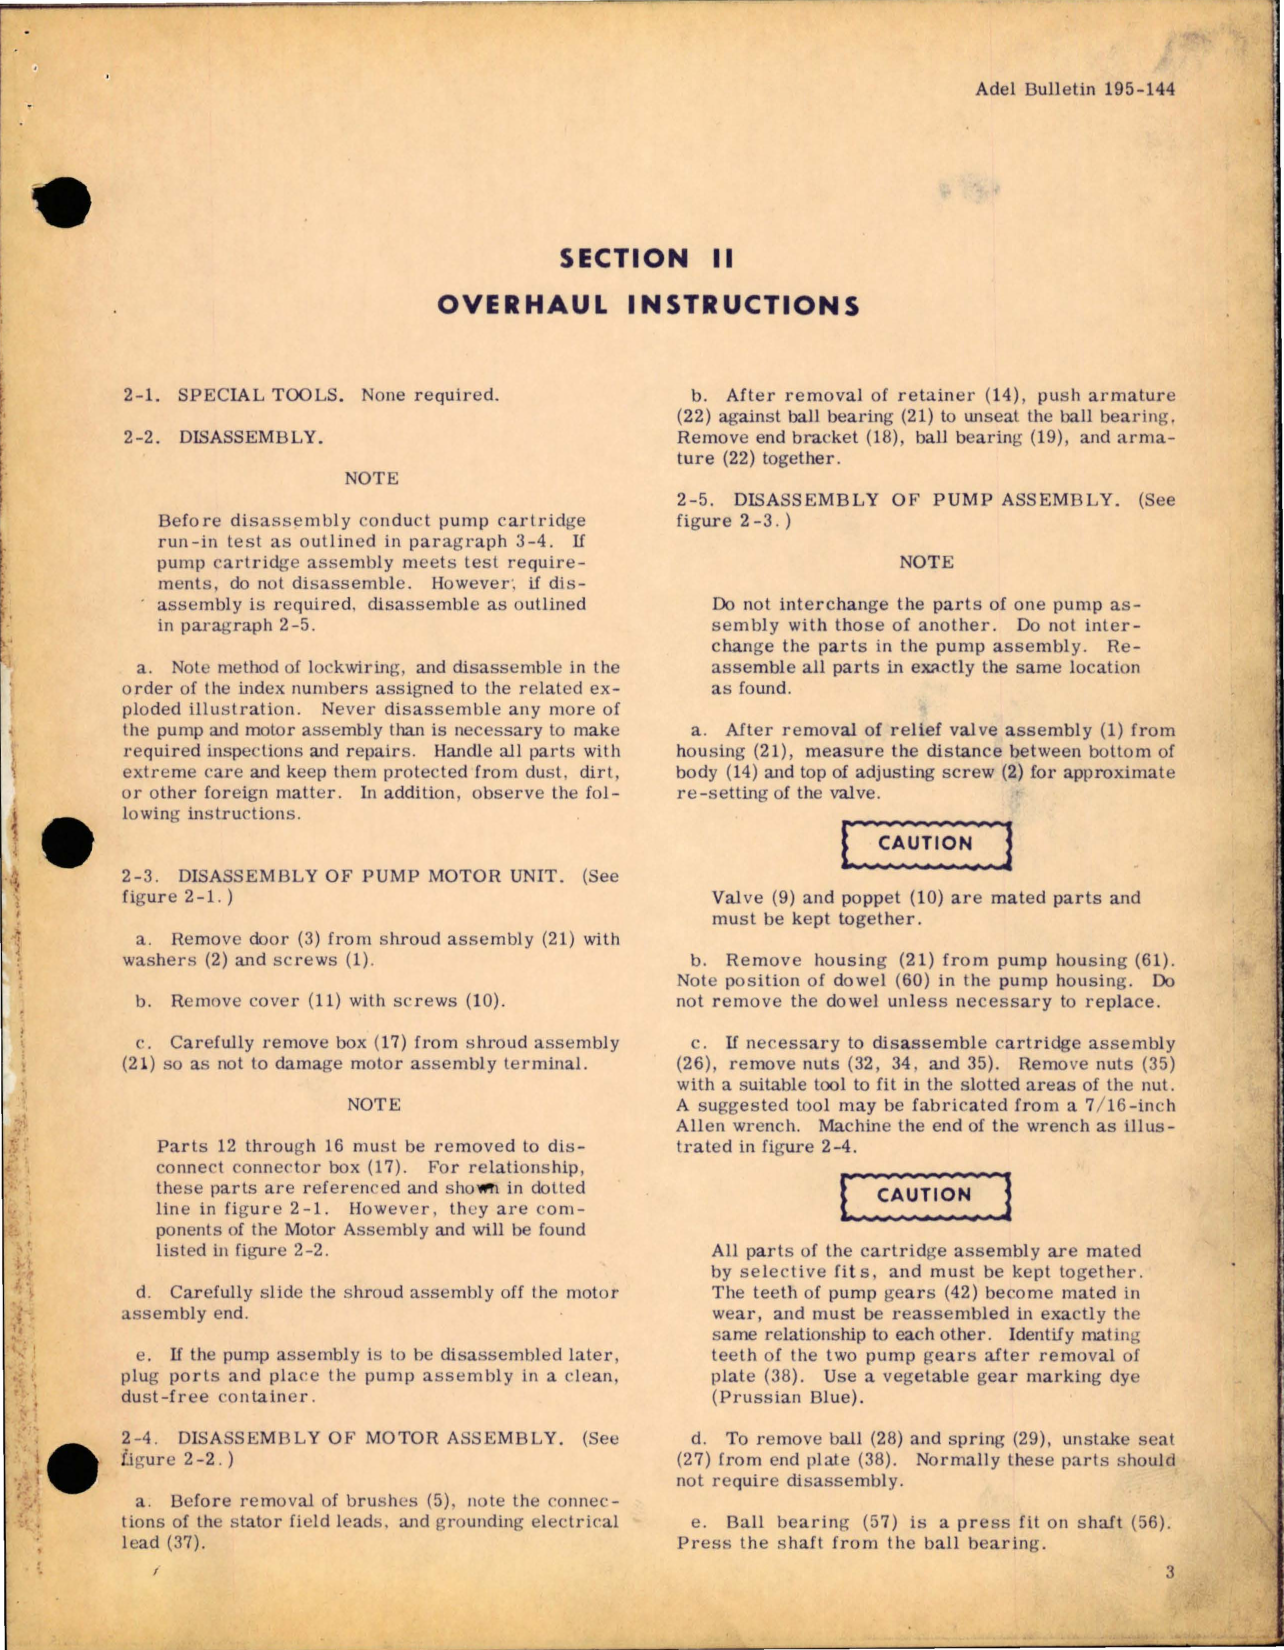 Sample page 5 from AirCorps Library document: Overhaul Instructions with Parts Breakdown for High Pressure Propeller Feathering Pump Motor Unit - Part 51300 